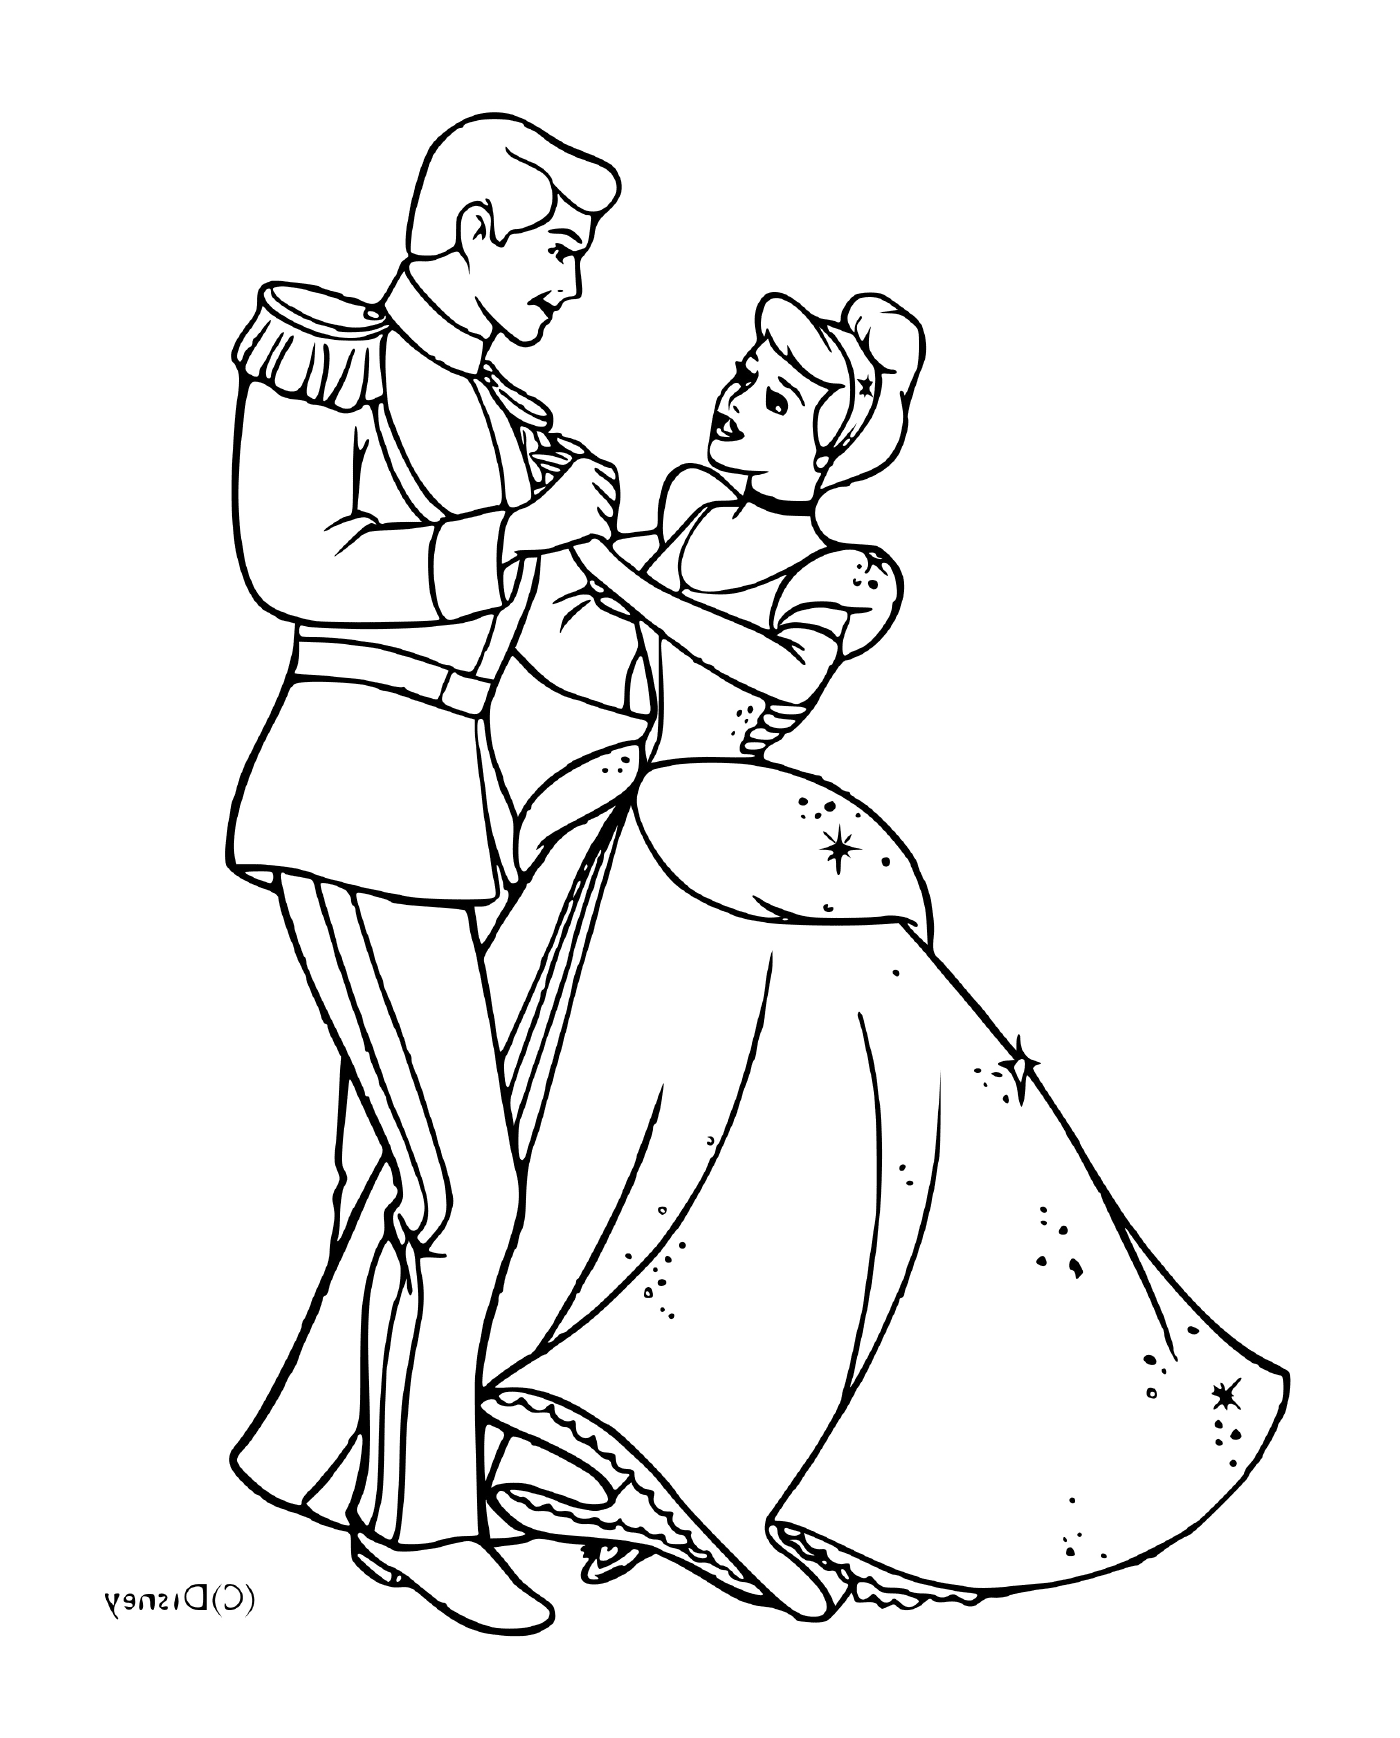  Cinderella and her charming prince dancing together 